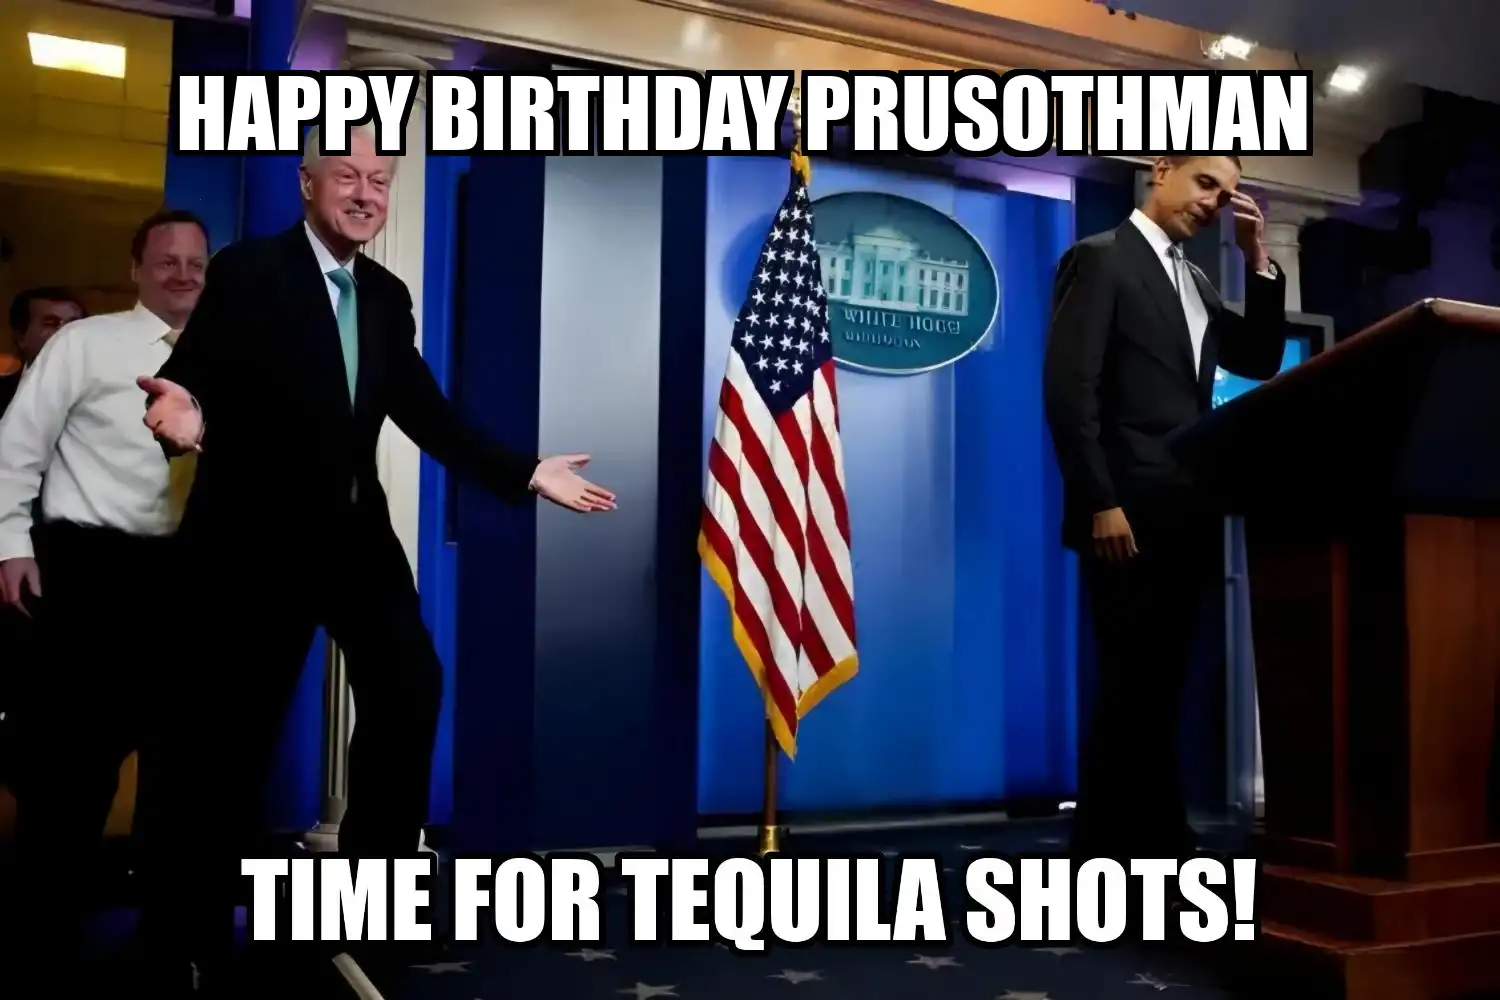 Happy Birthday Prusothman Time For Tequila Shots Memes